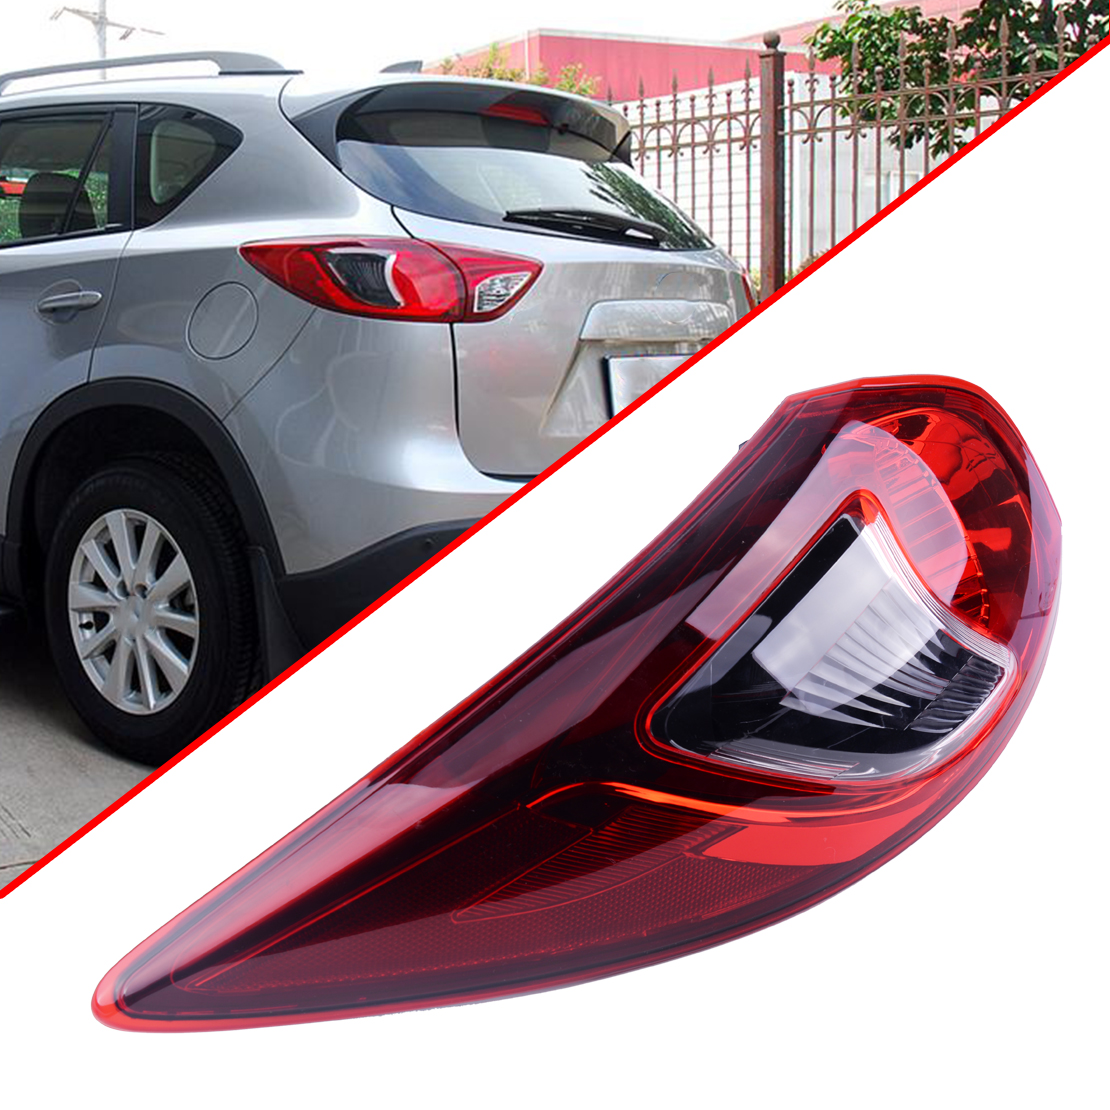 Fit For Mazda CX5 CX-5 2013 2014 2015 2016 Rear Left Outer Tail Light Brake Lamp